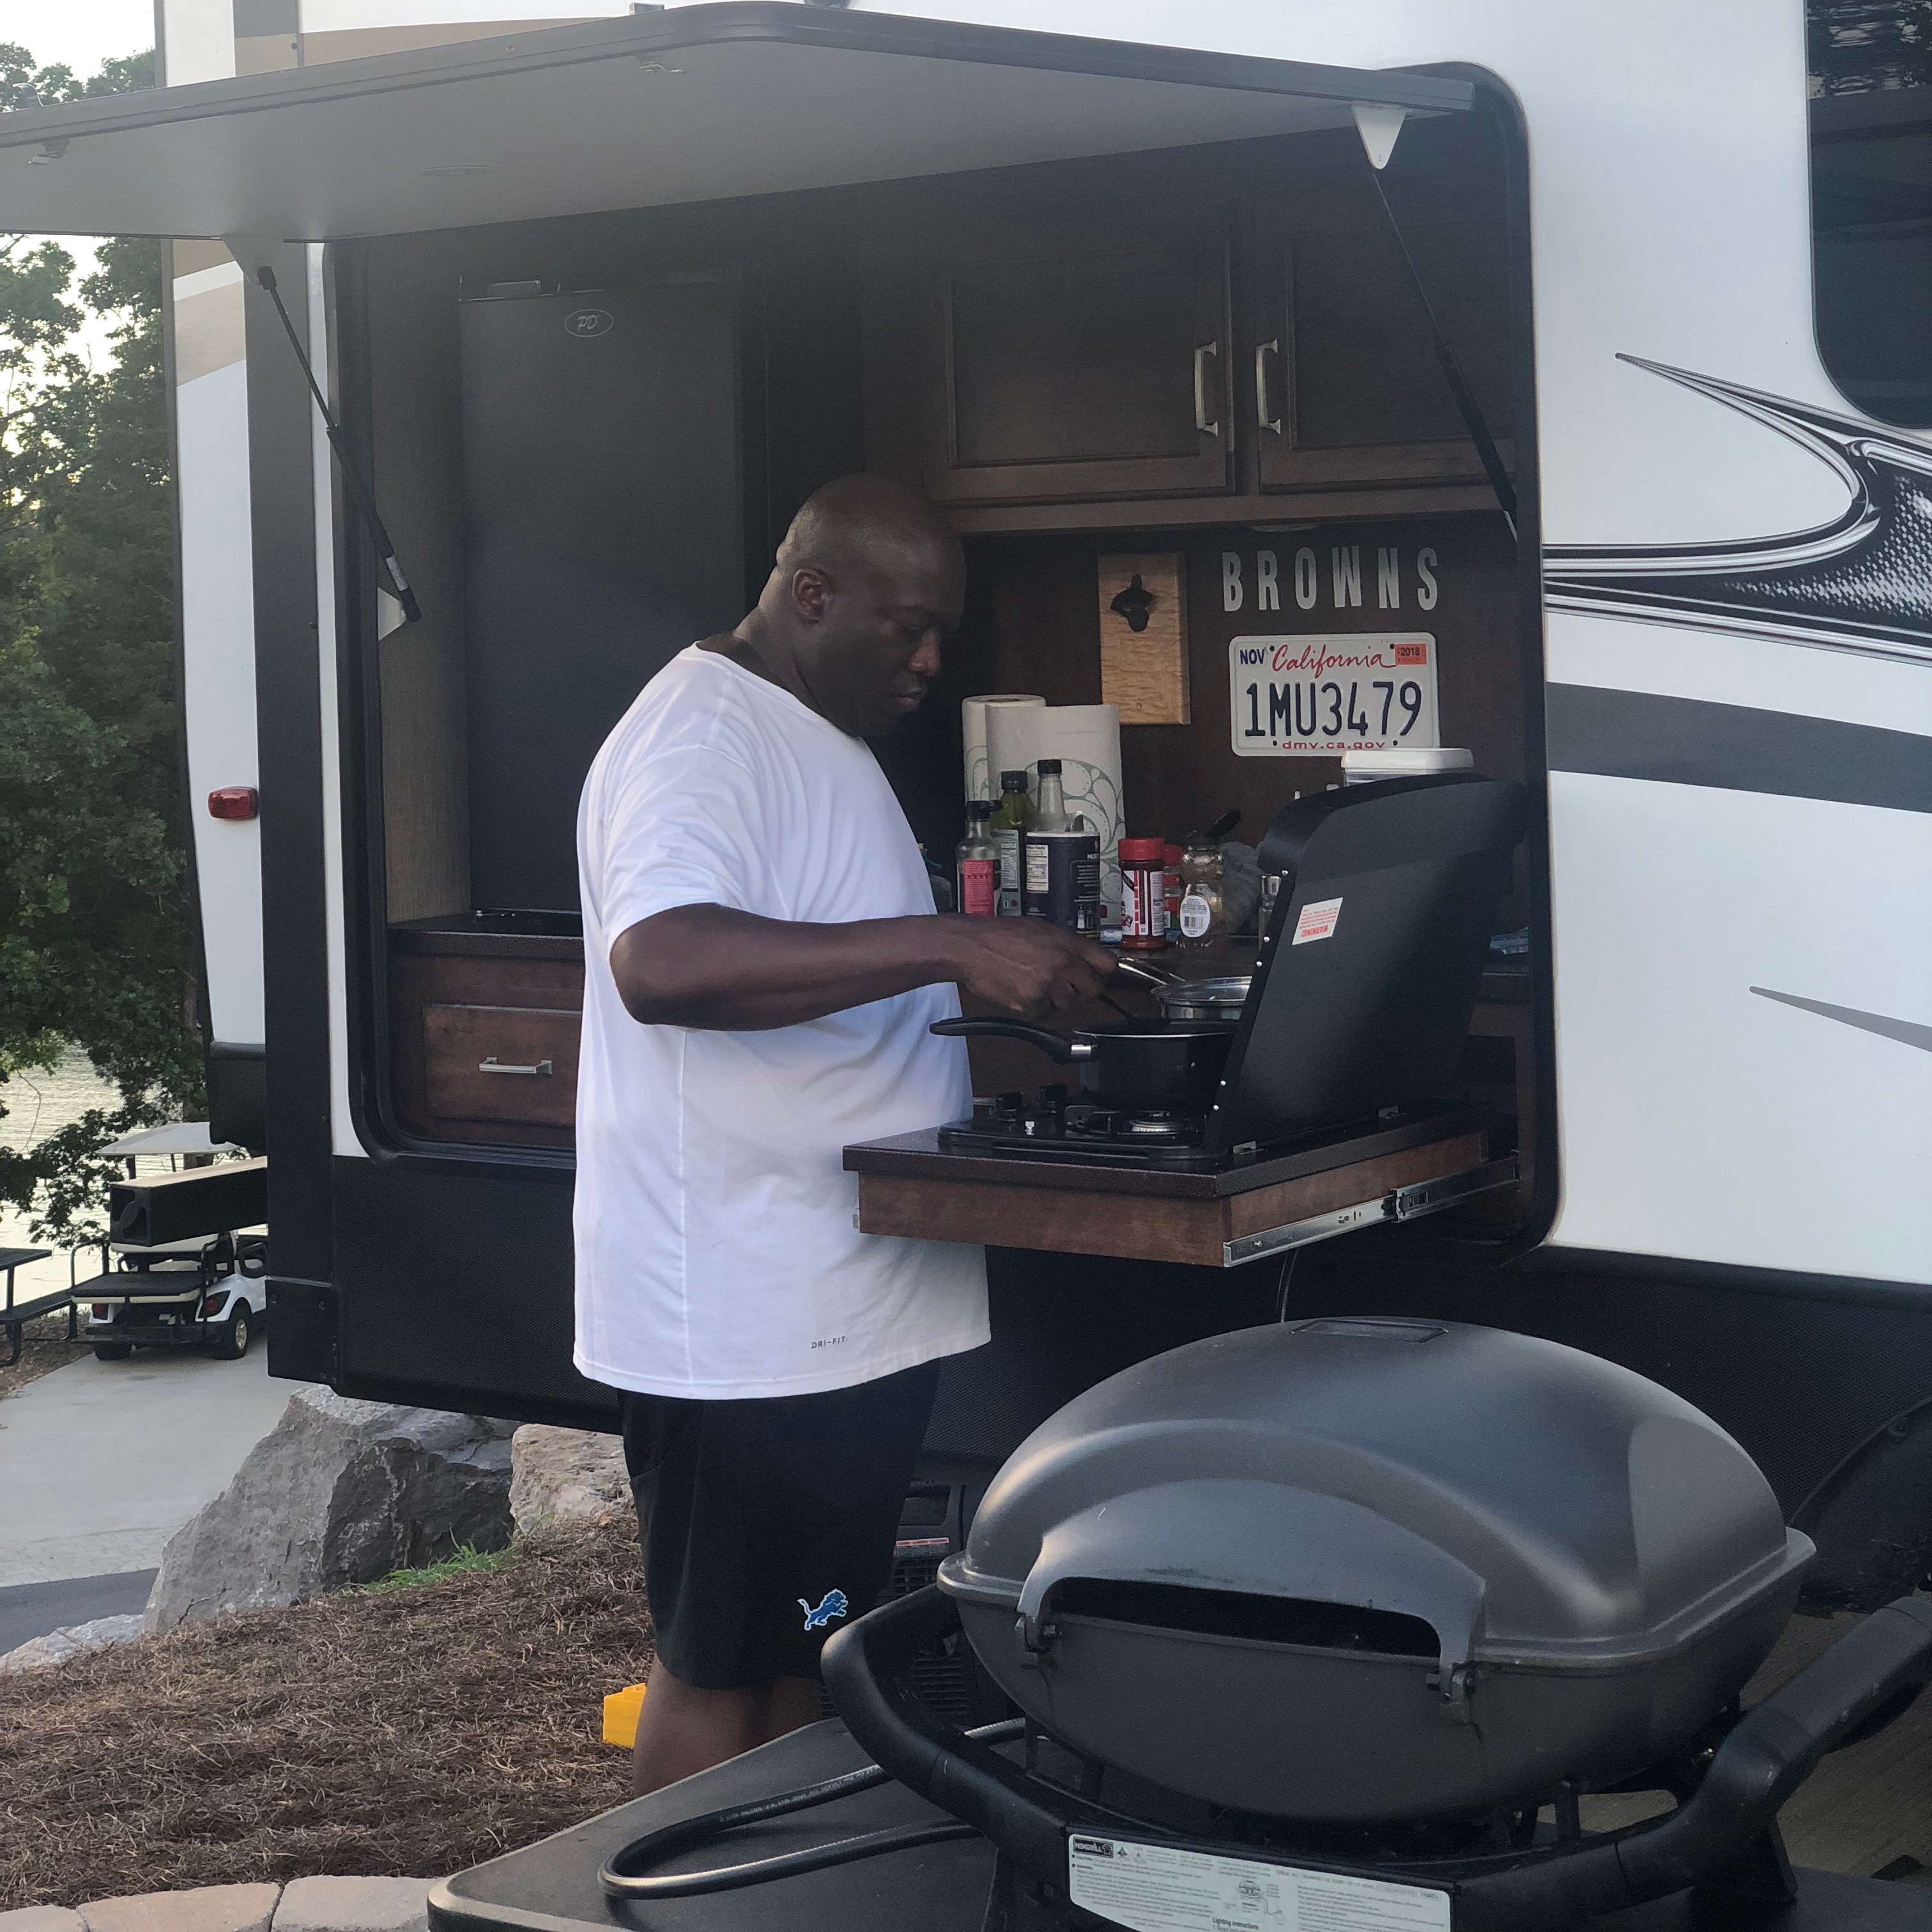 RVers love cooking in their outdoor kitchen when at the campground